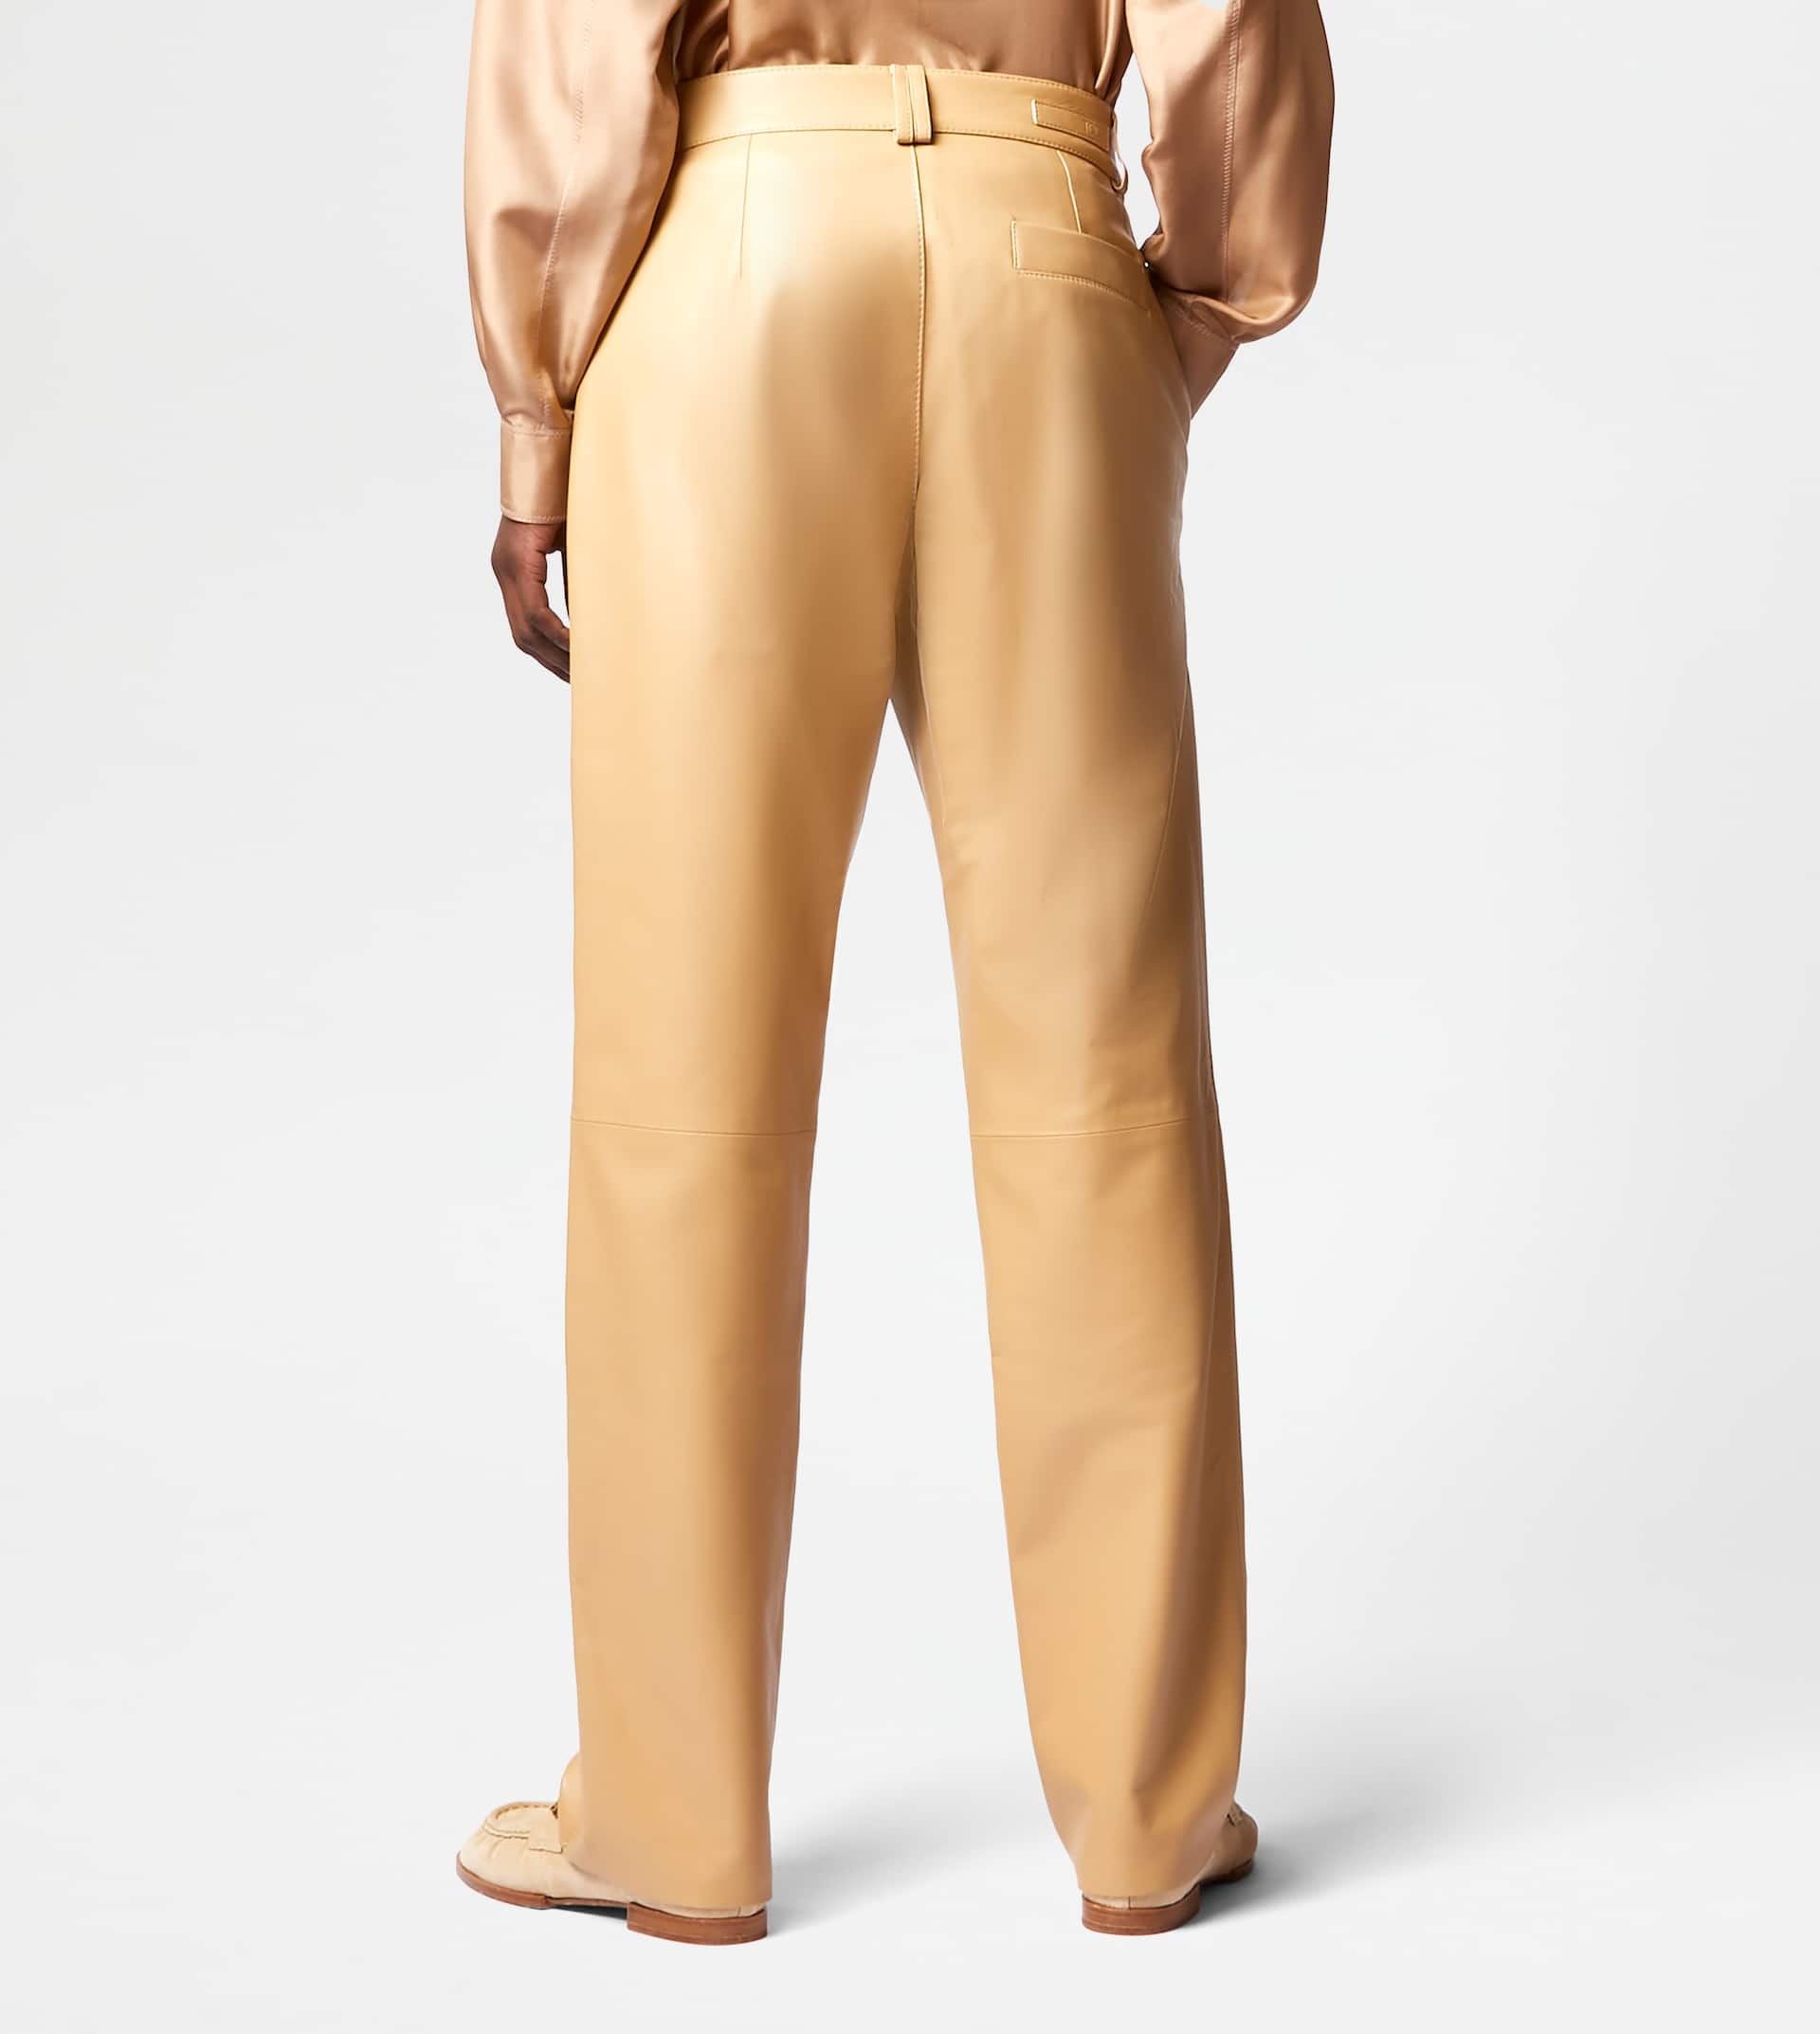 PANTS IN LEATHER - BEIGE - 8